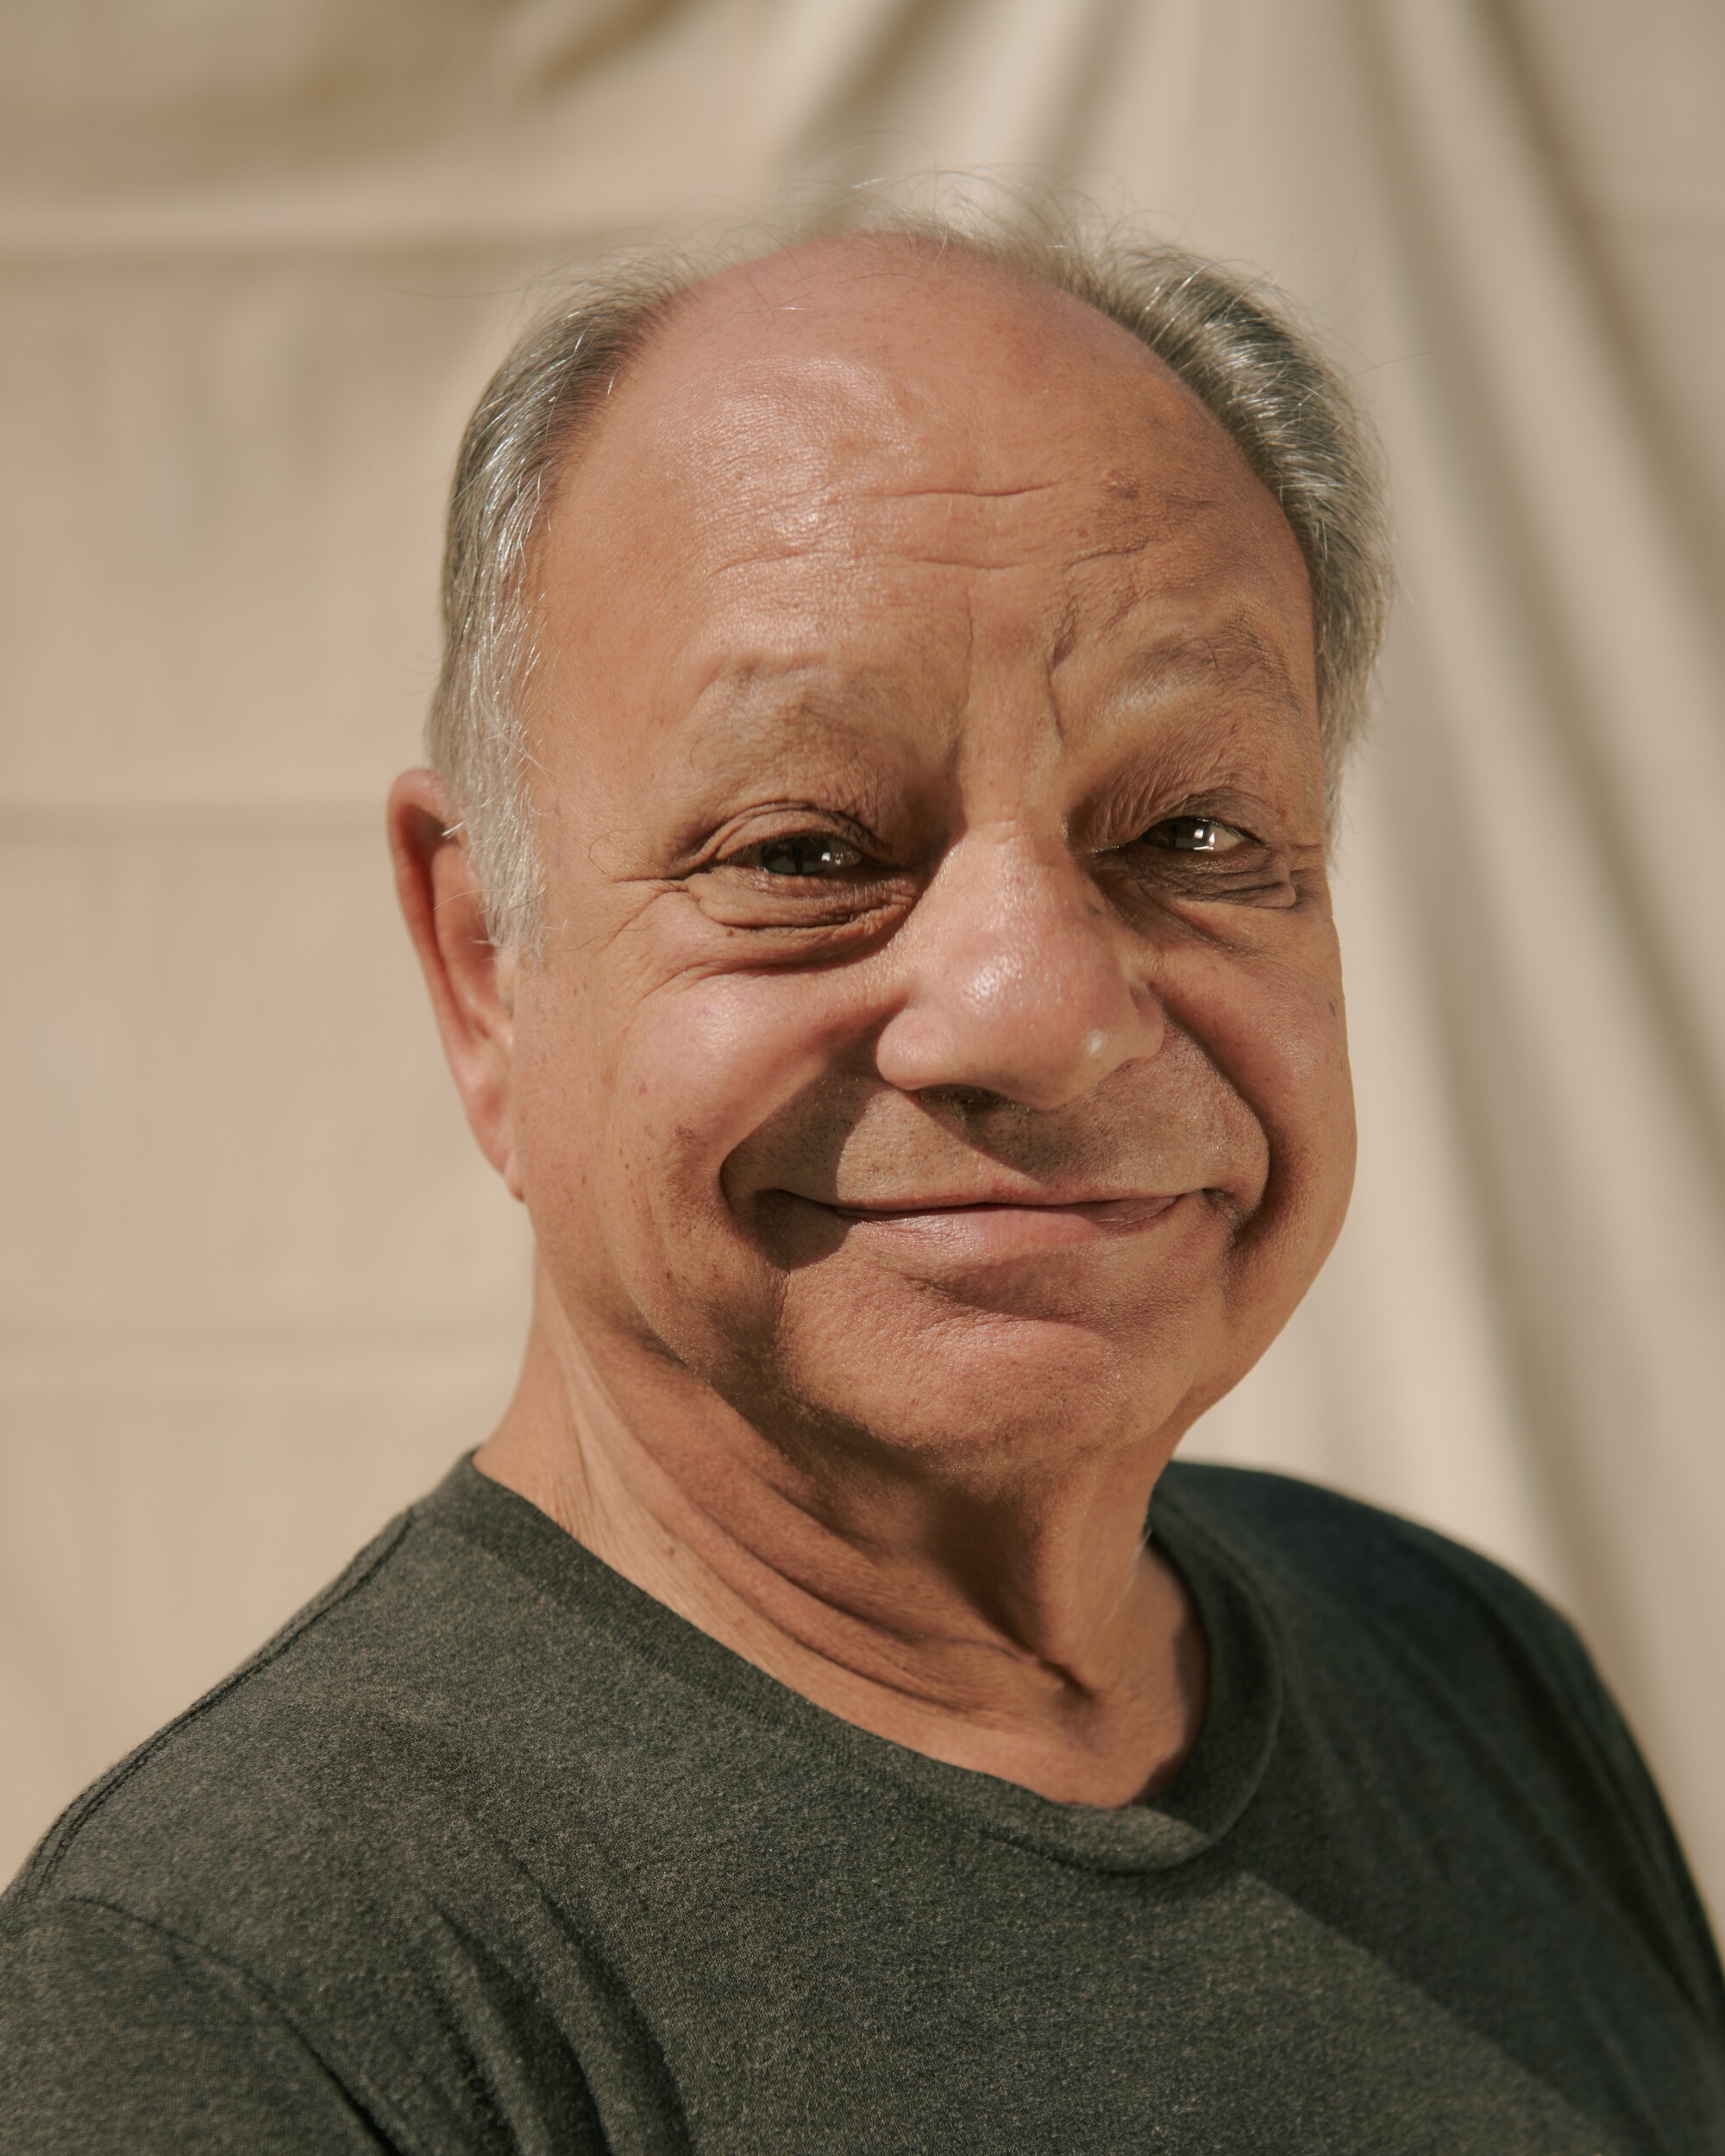 A close-up portrait of a smiling Cheech Marin.